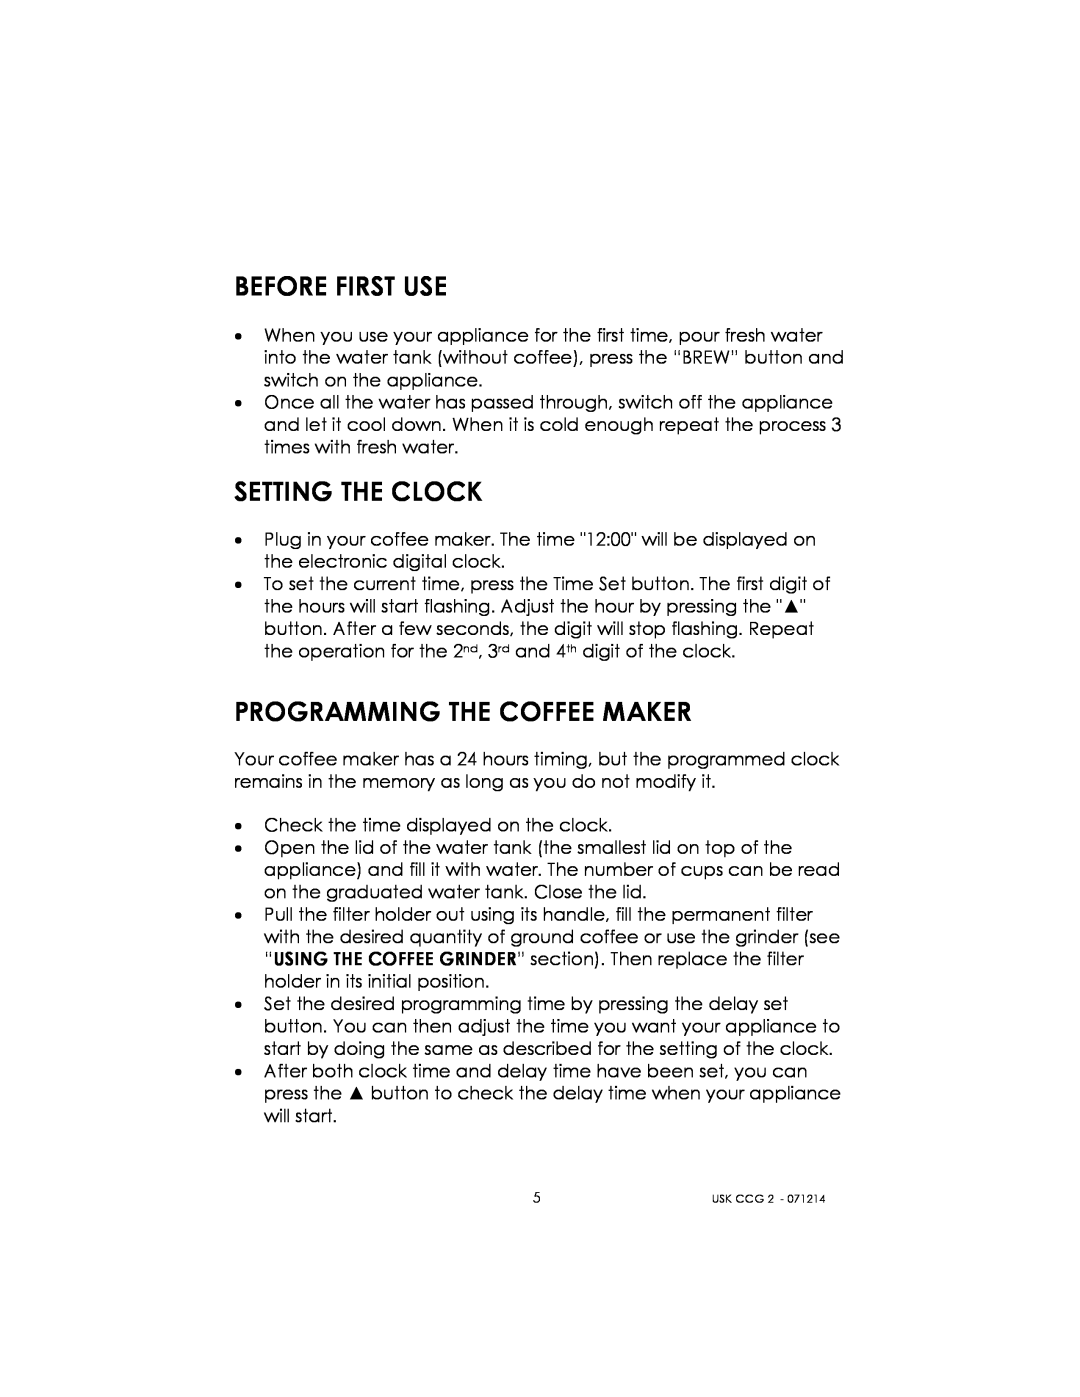 Kalorik USK CCG 2 manual Before First Use, Setting The Clock, Programming The Coffee Maker 